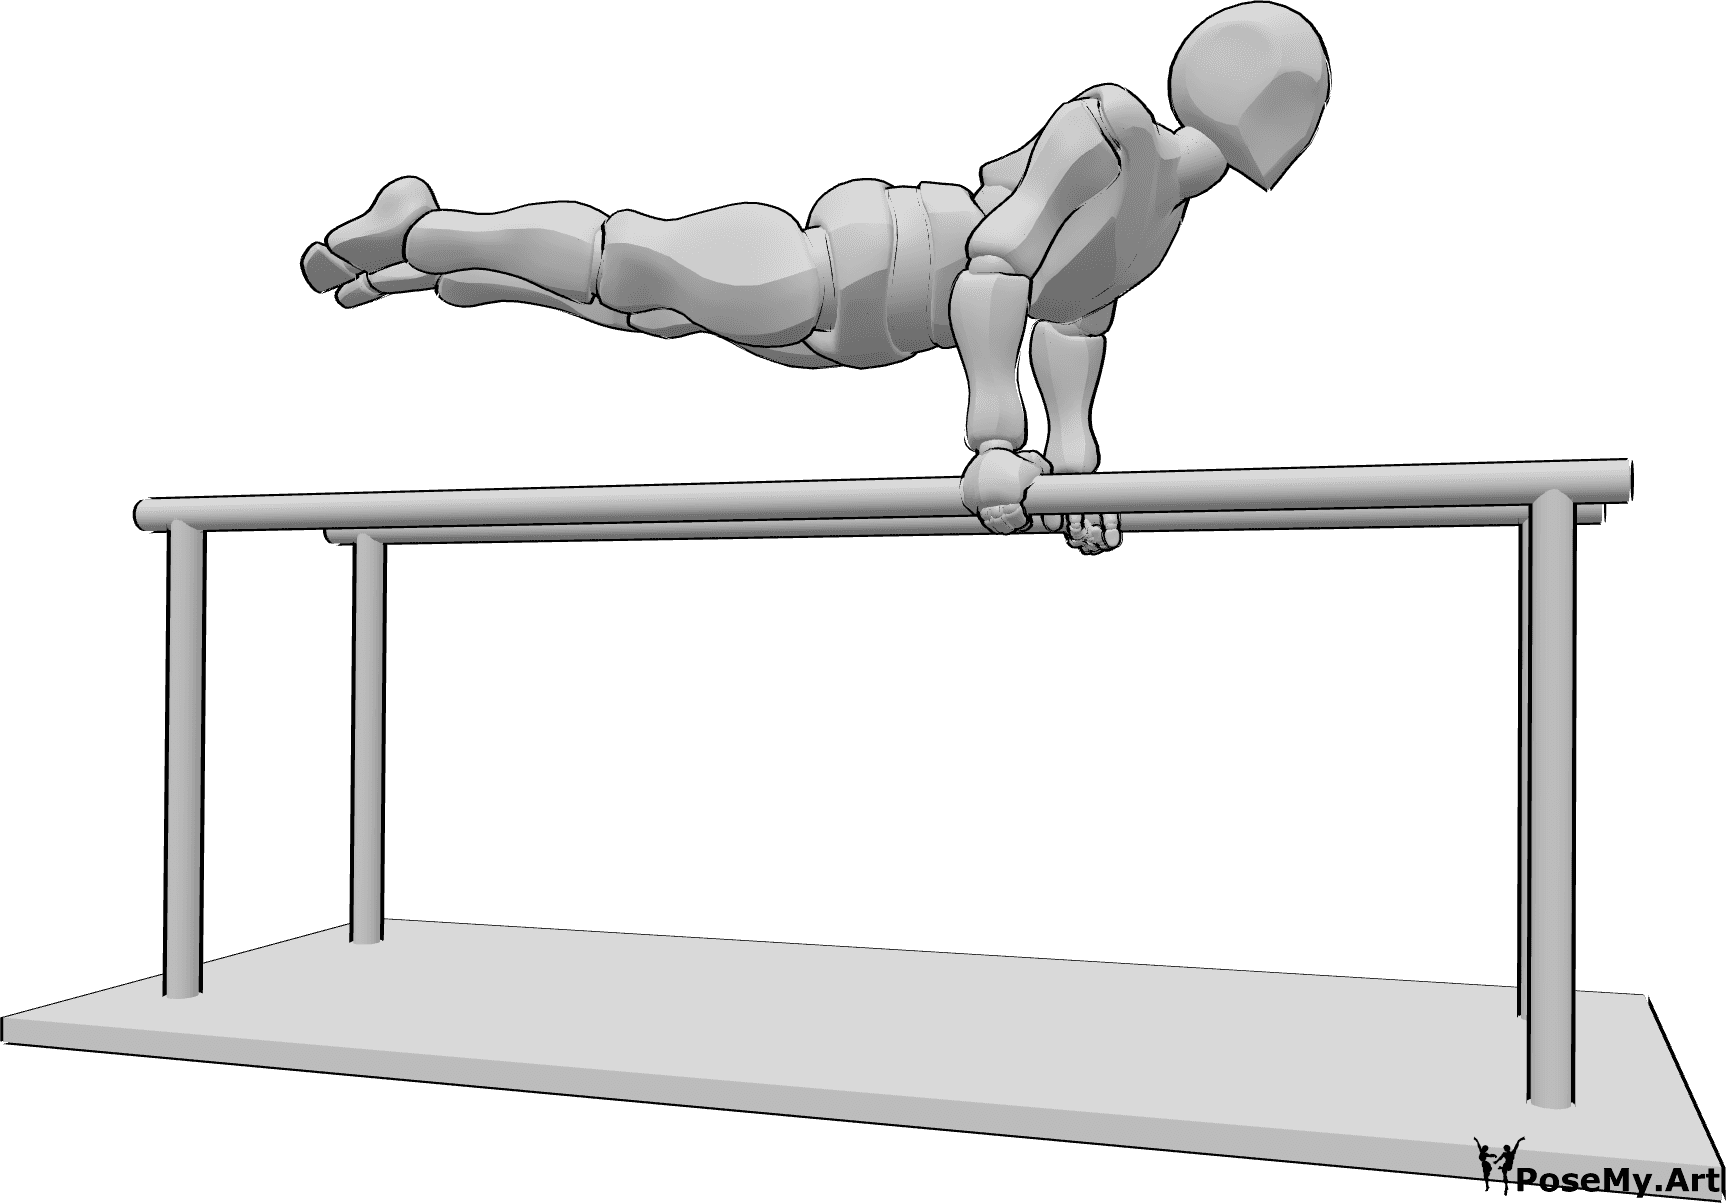 Pose Reference- Parallel bars handstanding pose - Male is doing gymnastics on the parallel bars, handstanding and keeping his body straight in the air horizontally